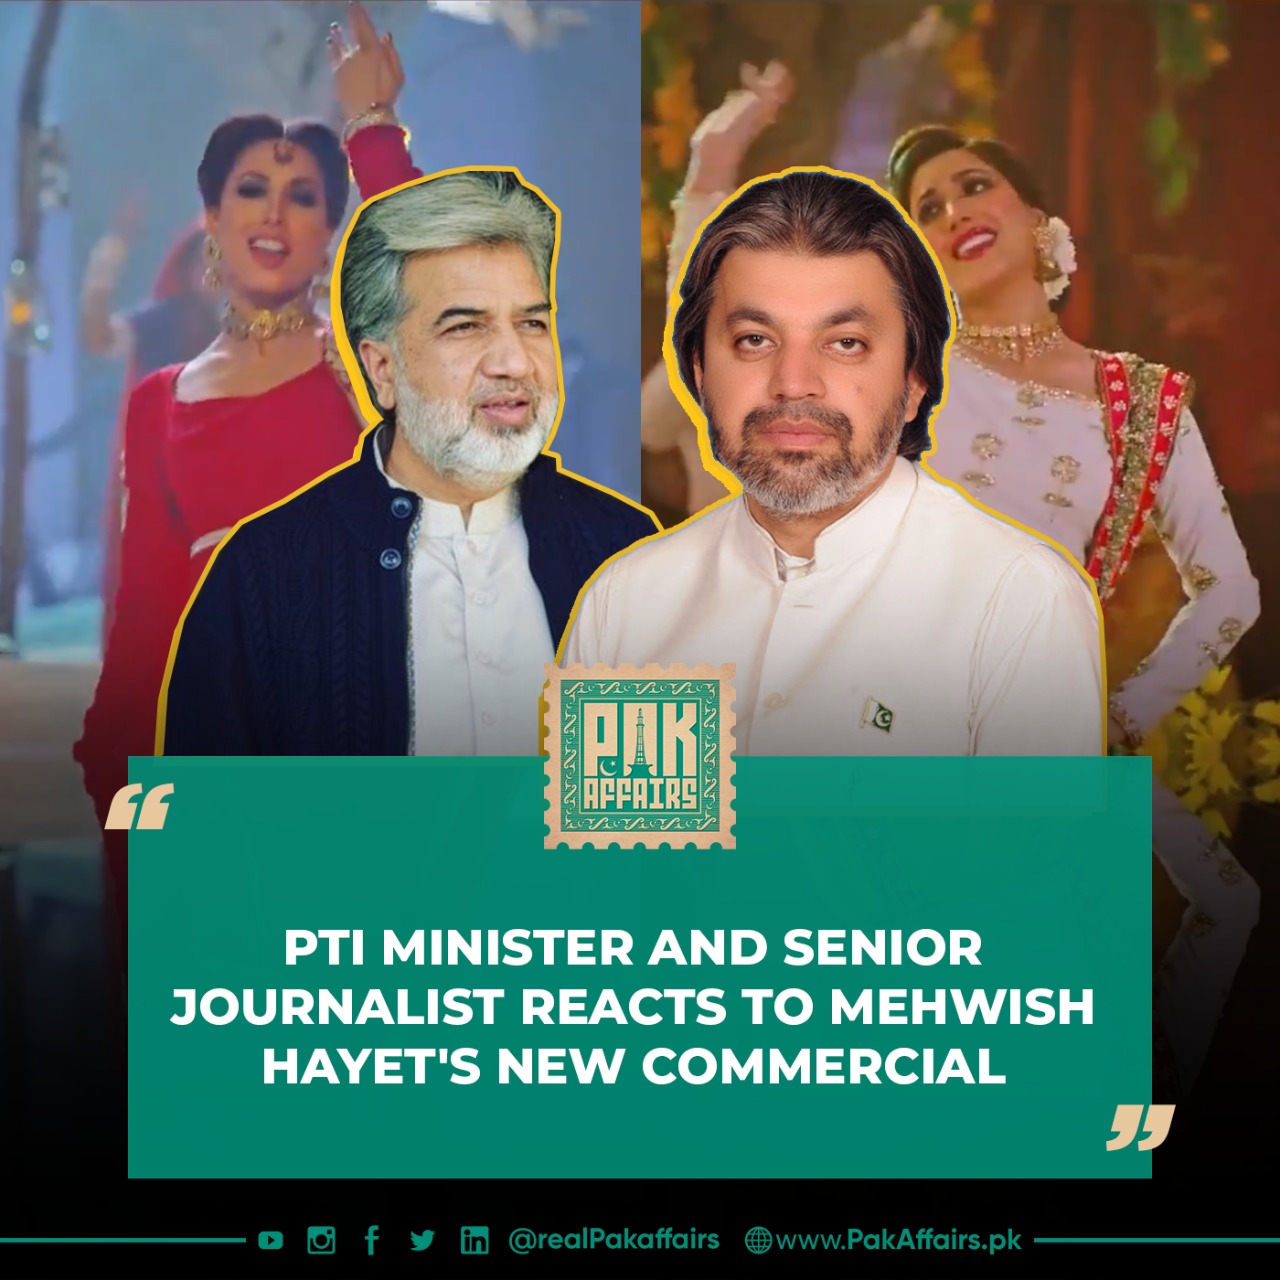 PTI minister and senior journalist reacts to Mehwish Hayet's new commercial